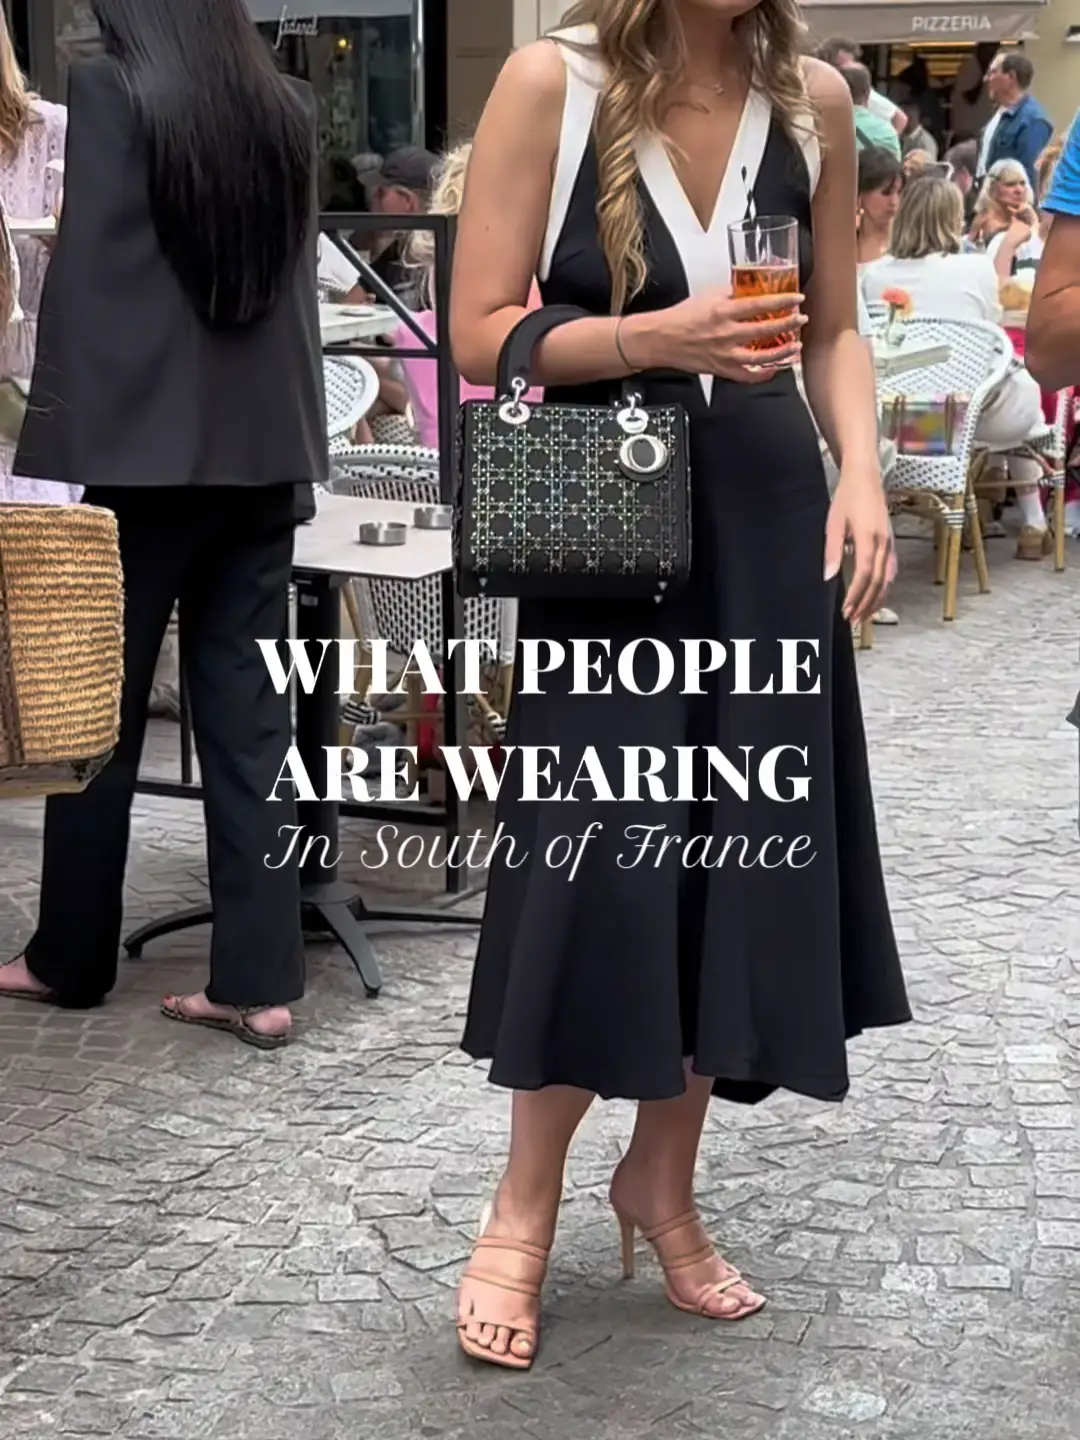 16 Chic Street Style Looks We Spotted in the South of France